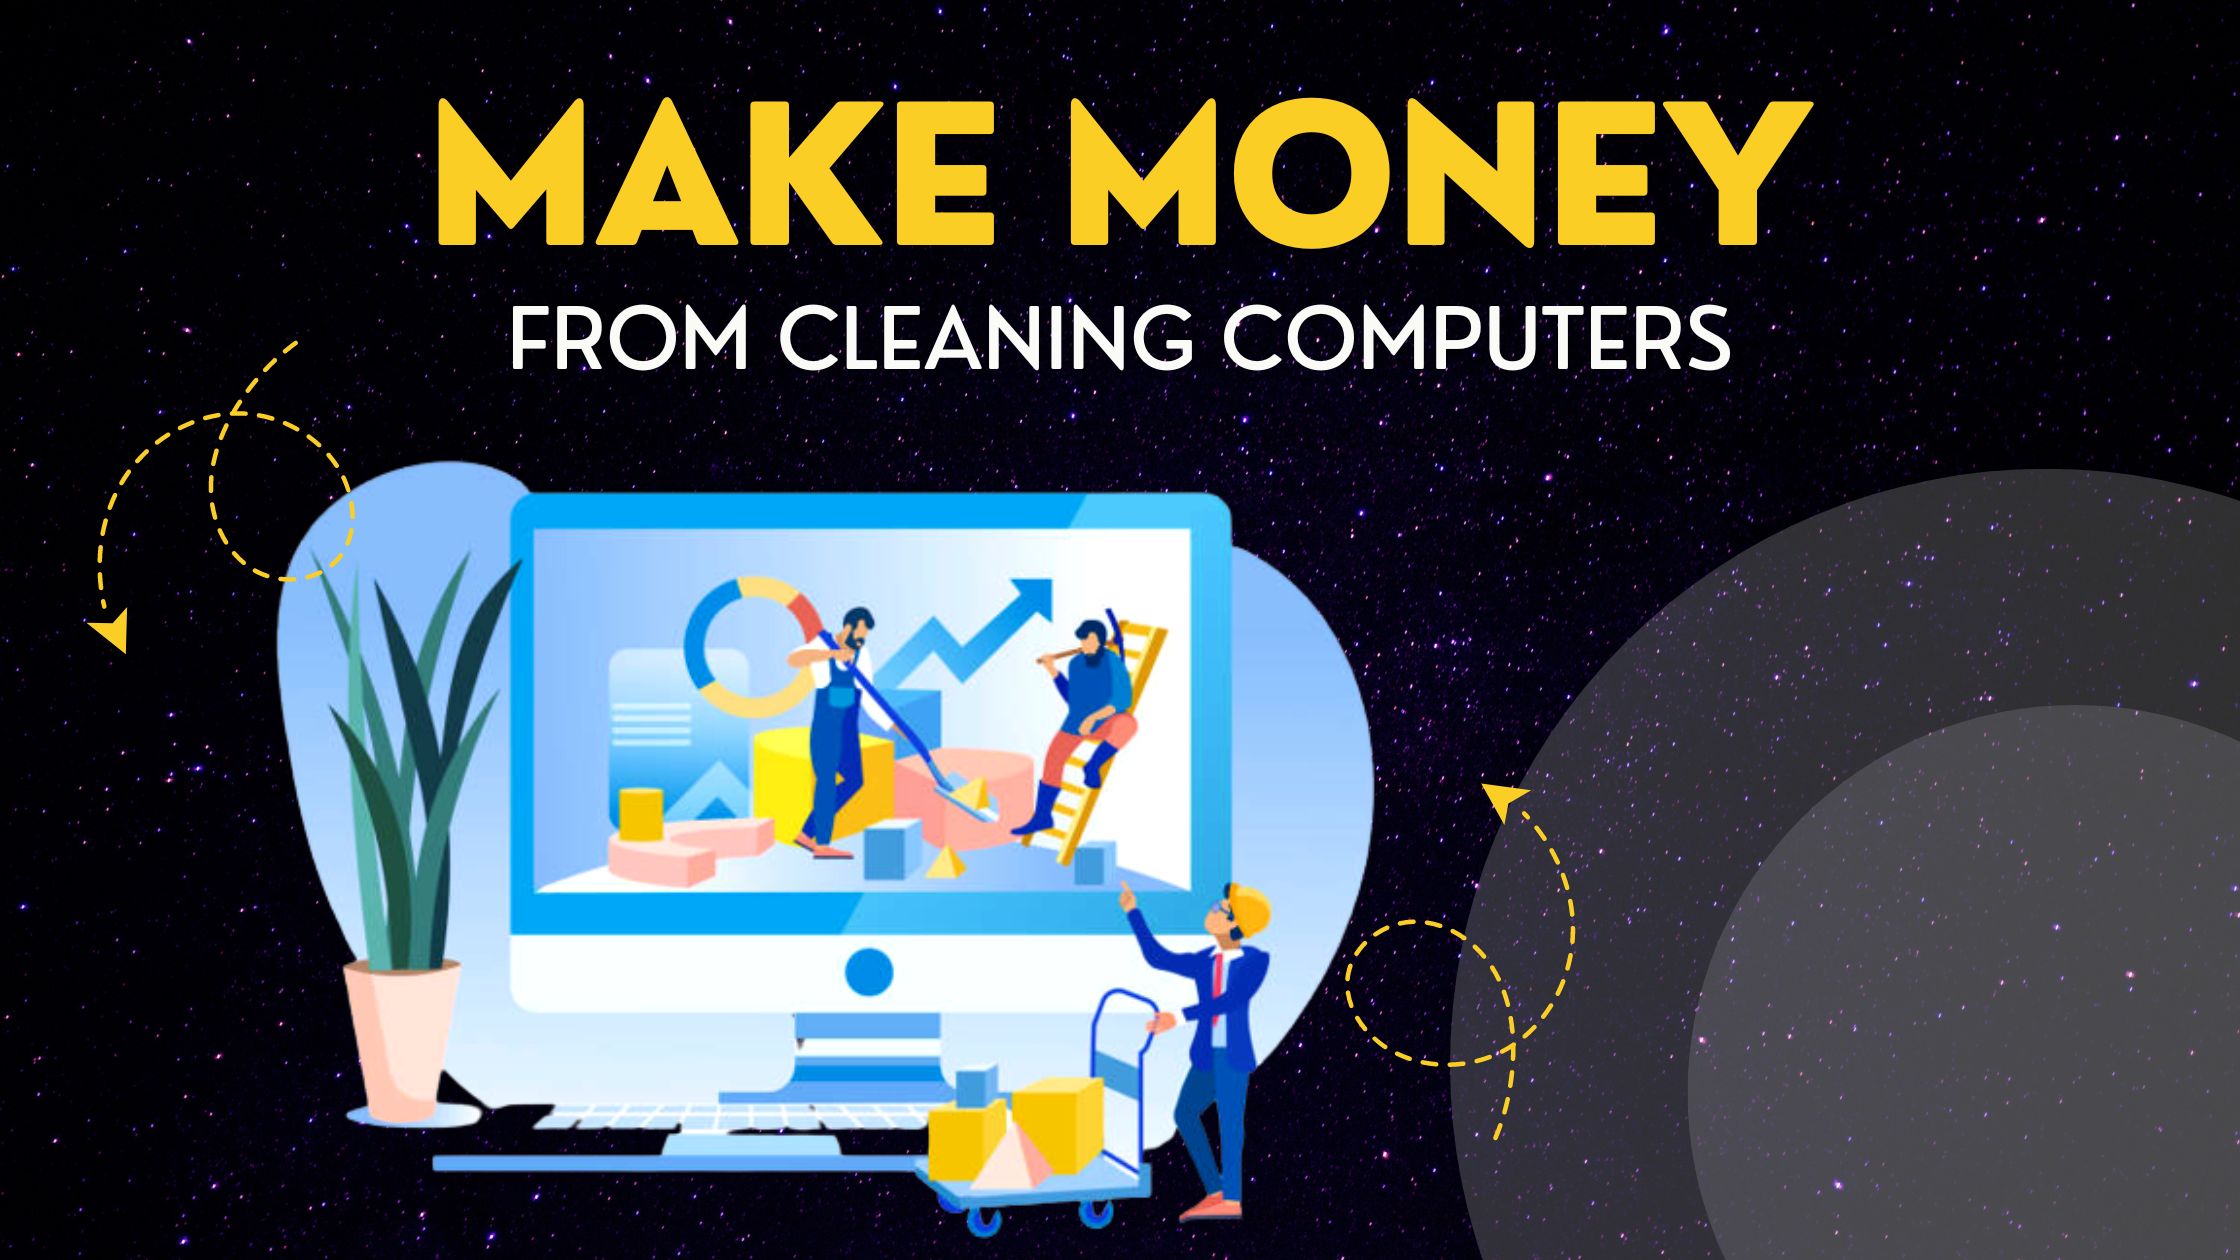 Make Money From Cleaning Computers